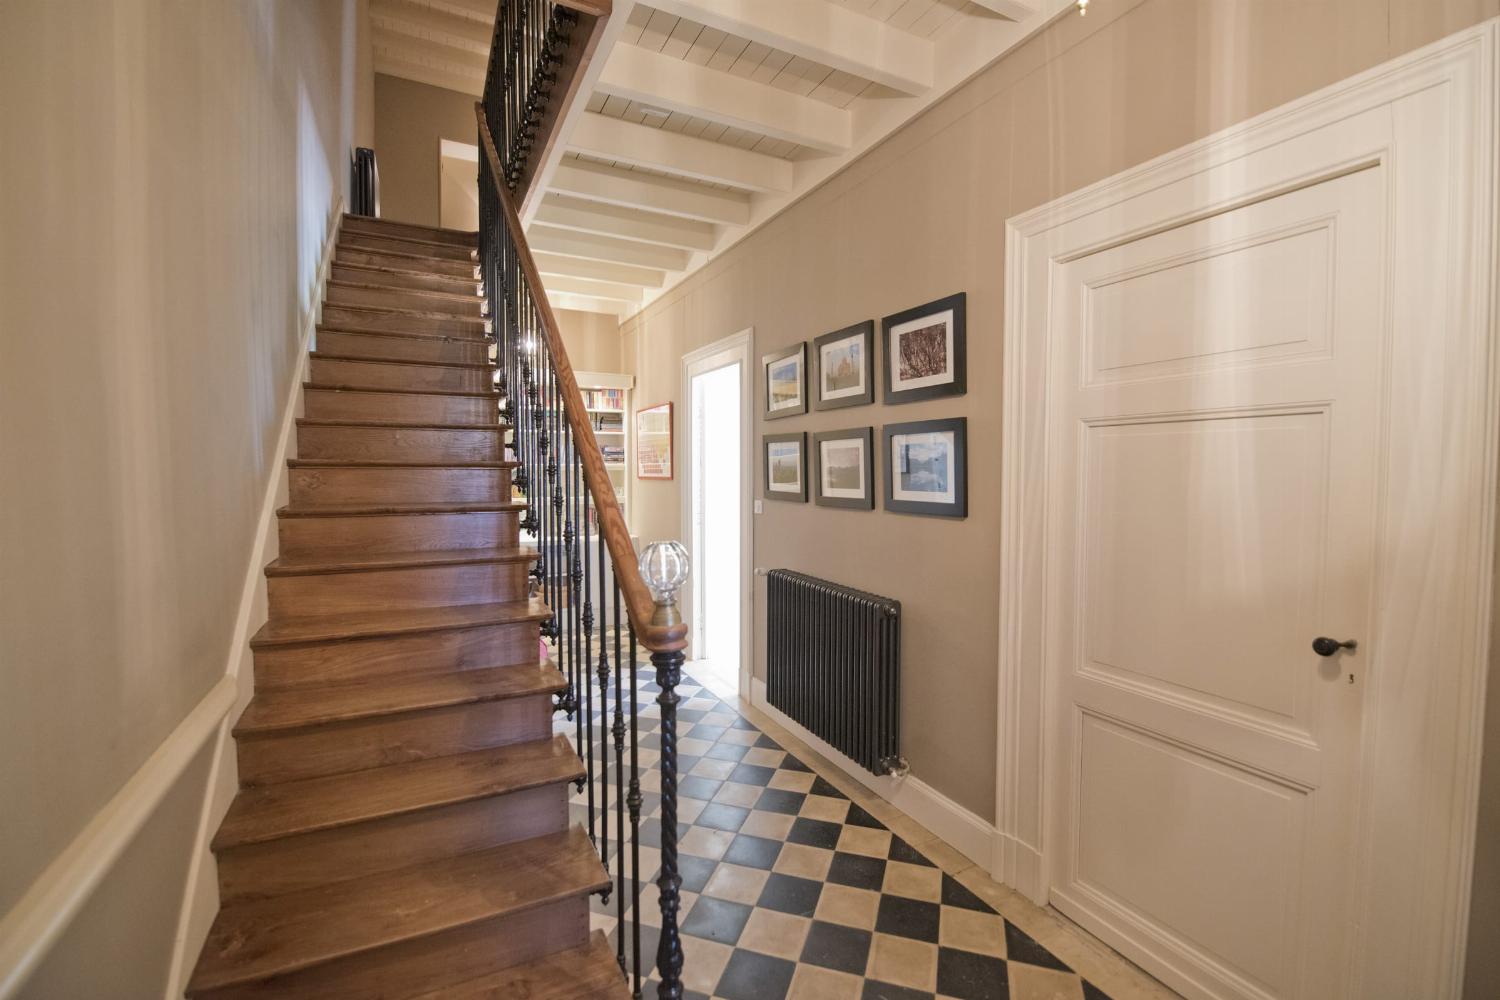 Staircase | Rental accommodation in Nouvelle-Aquitaine